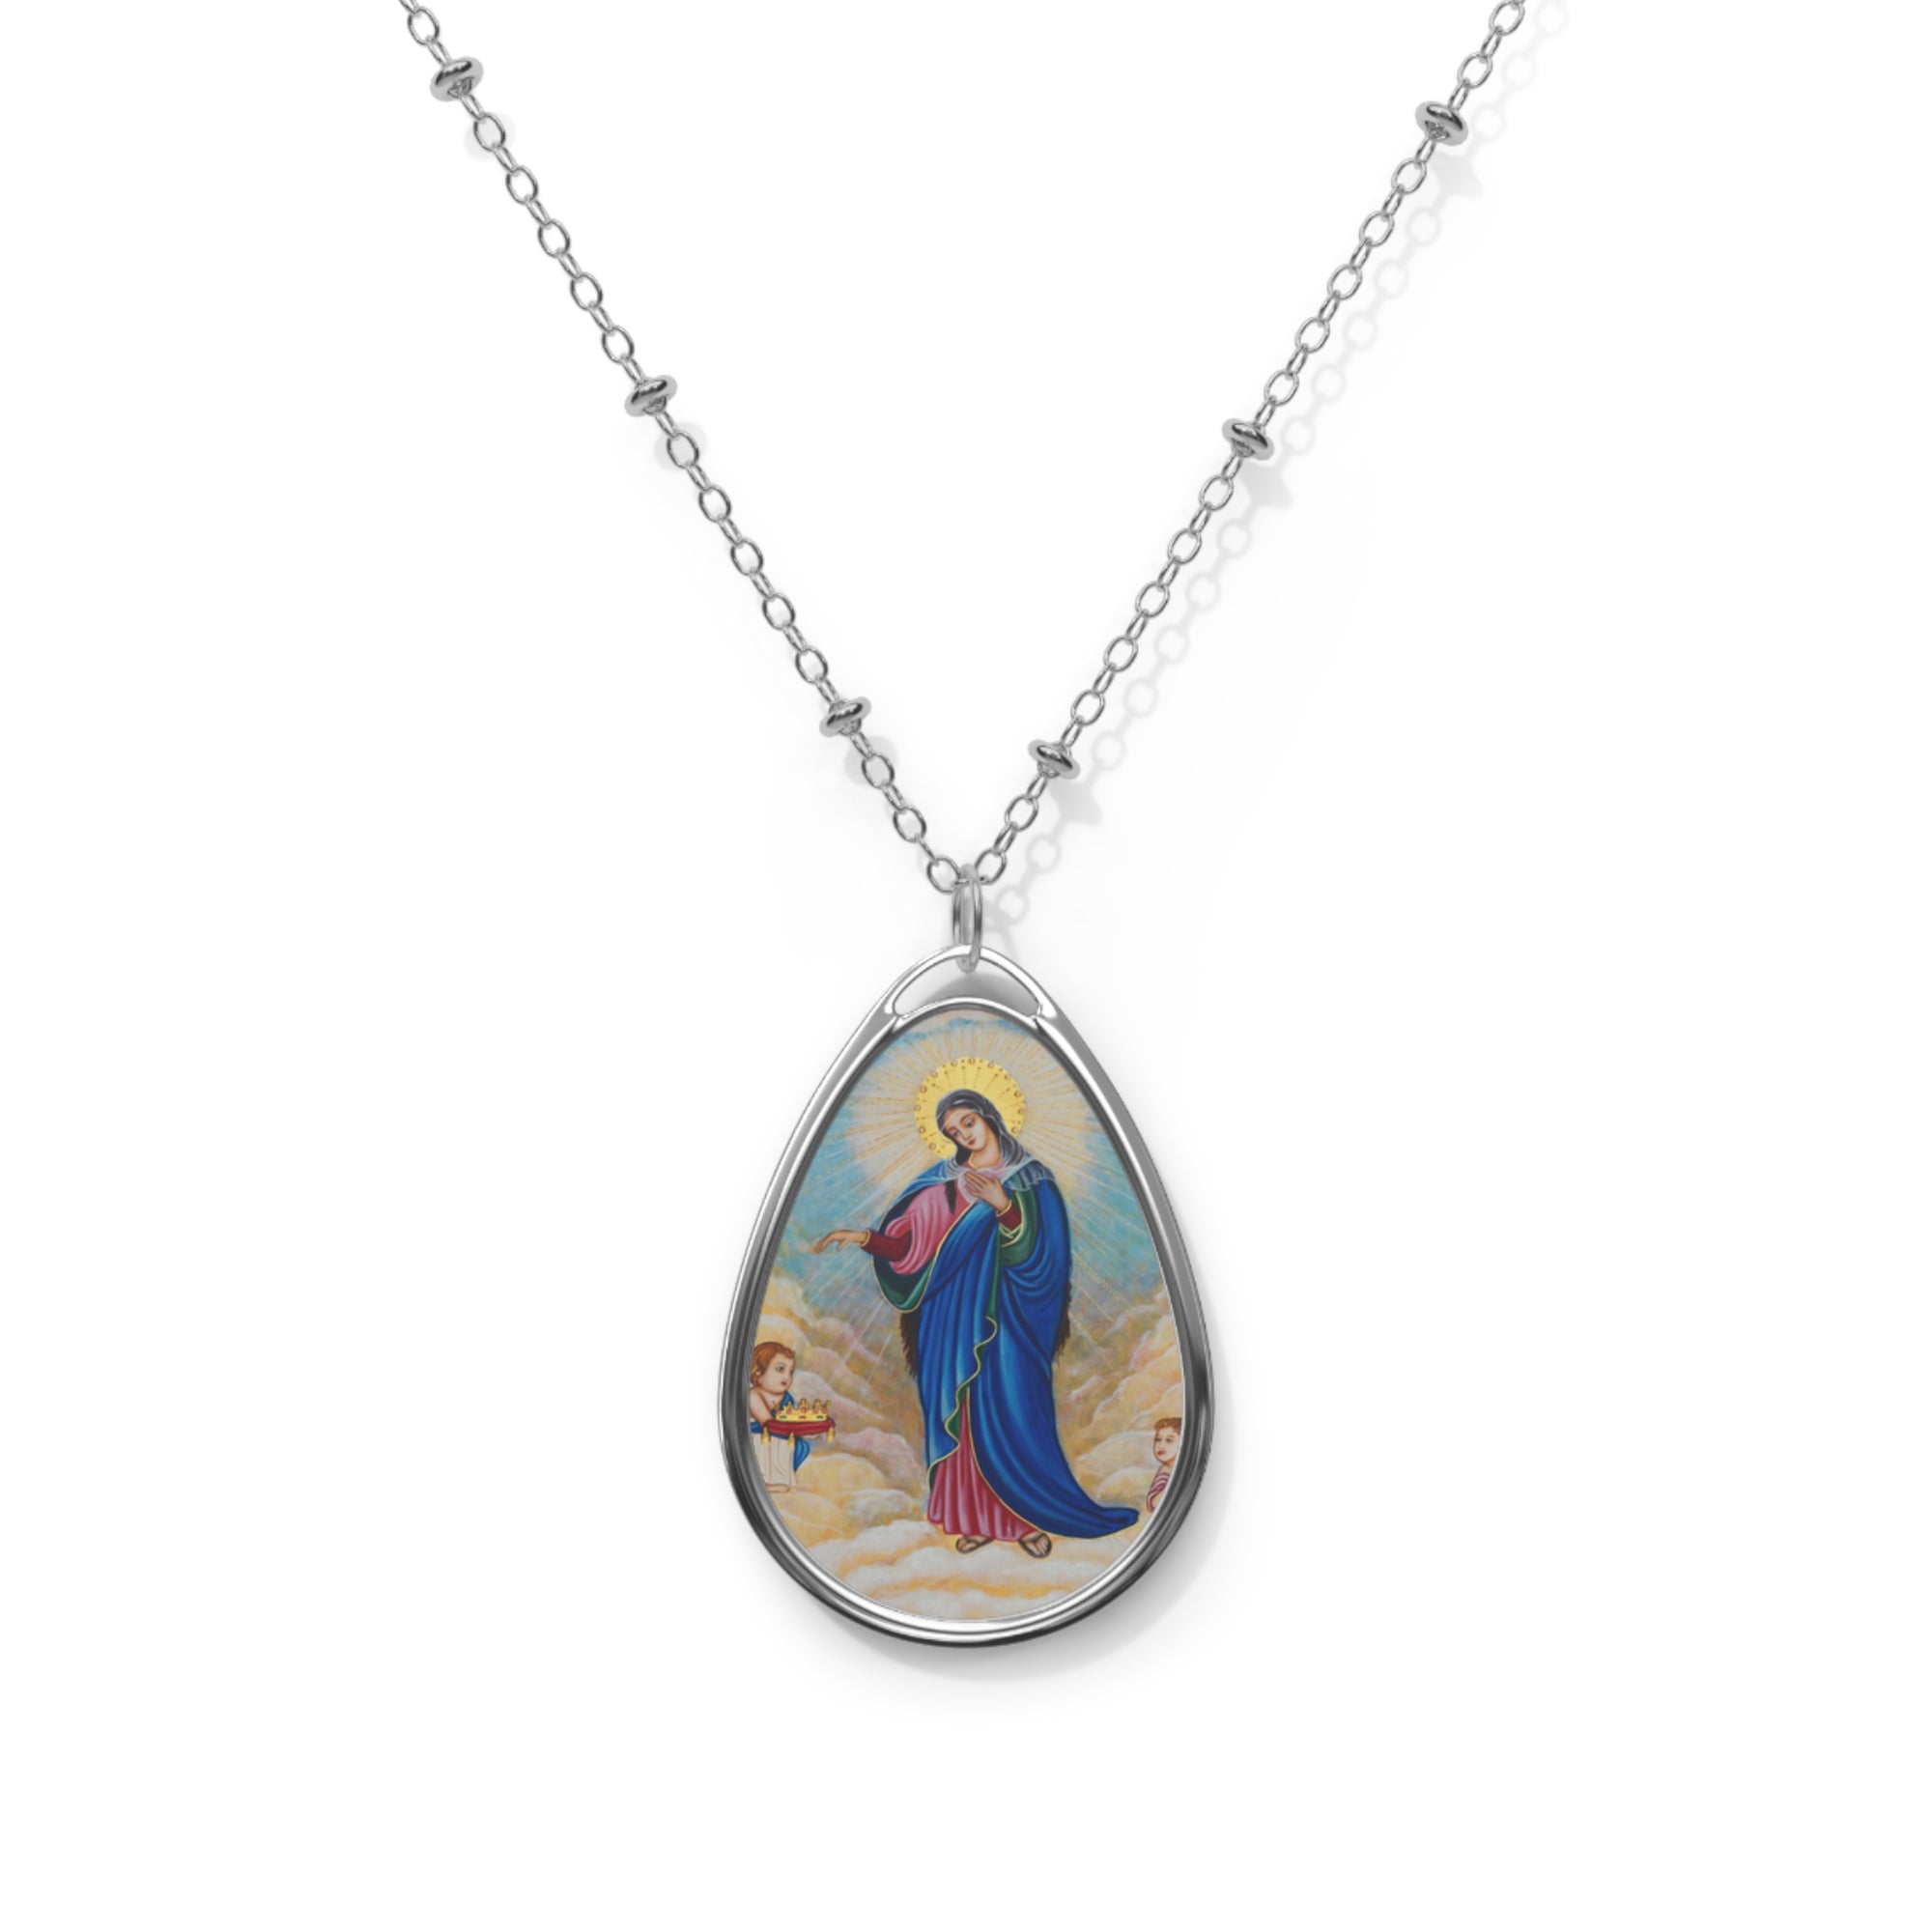 Our Lady of Palestine Necklace